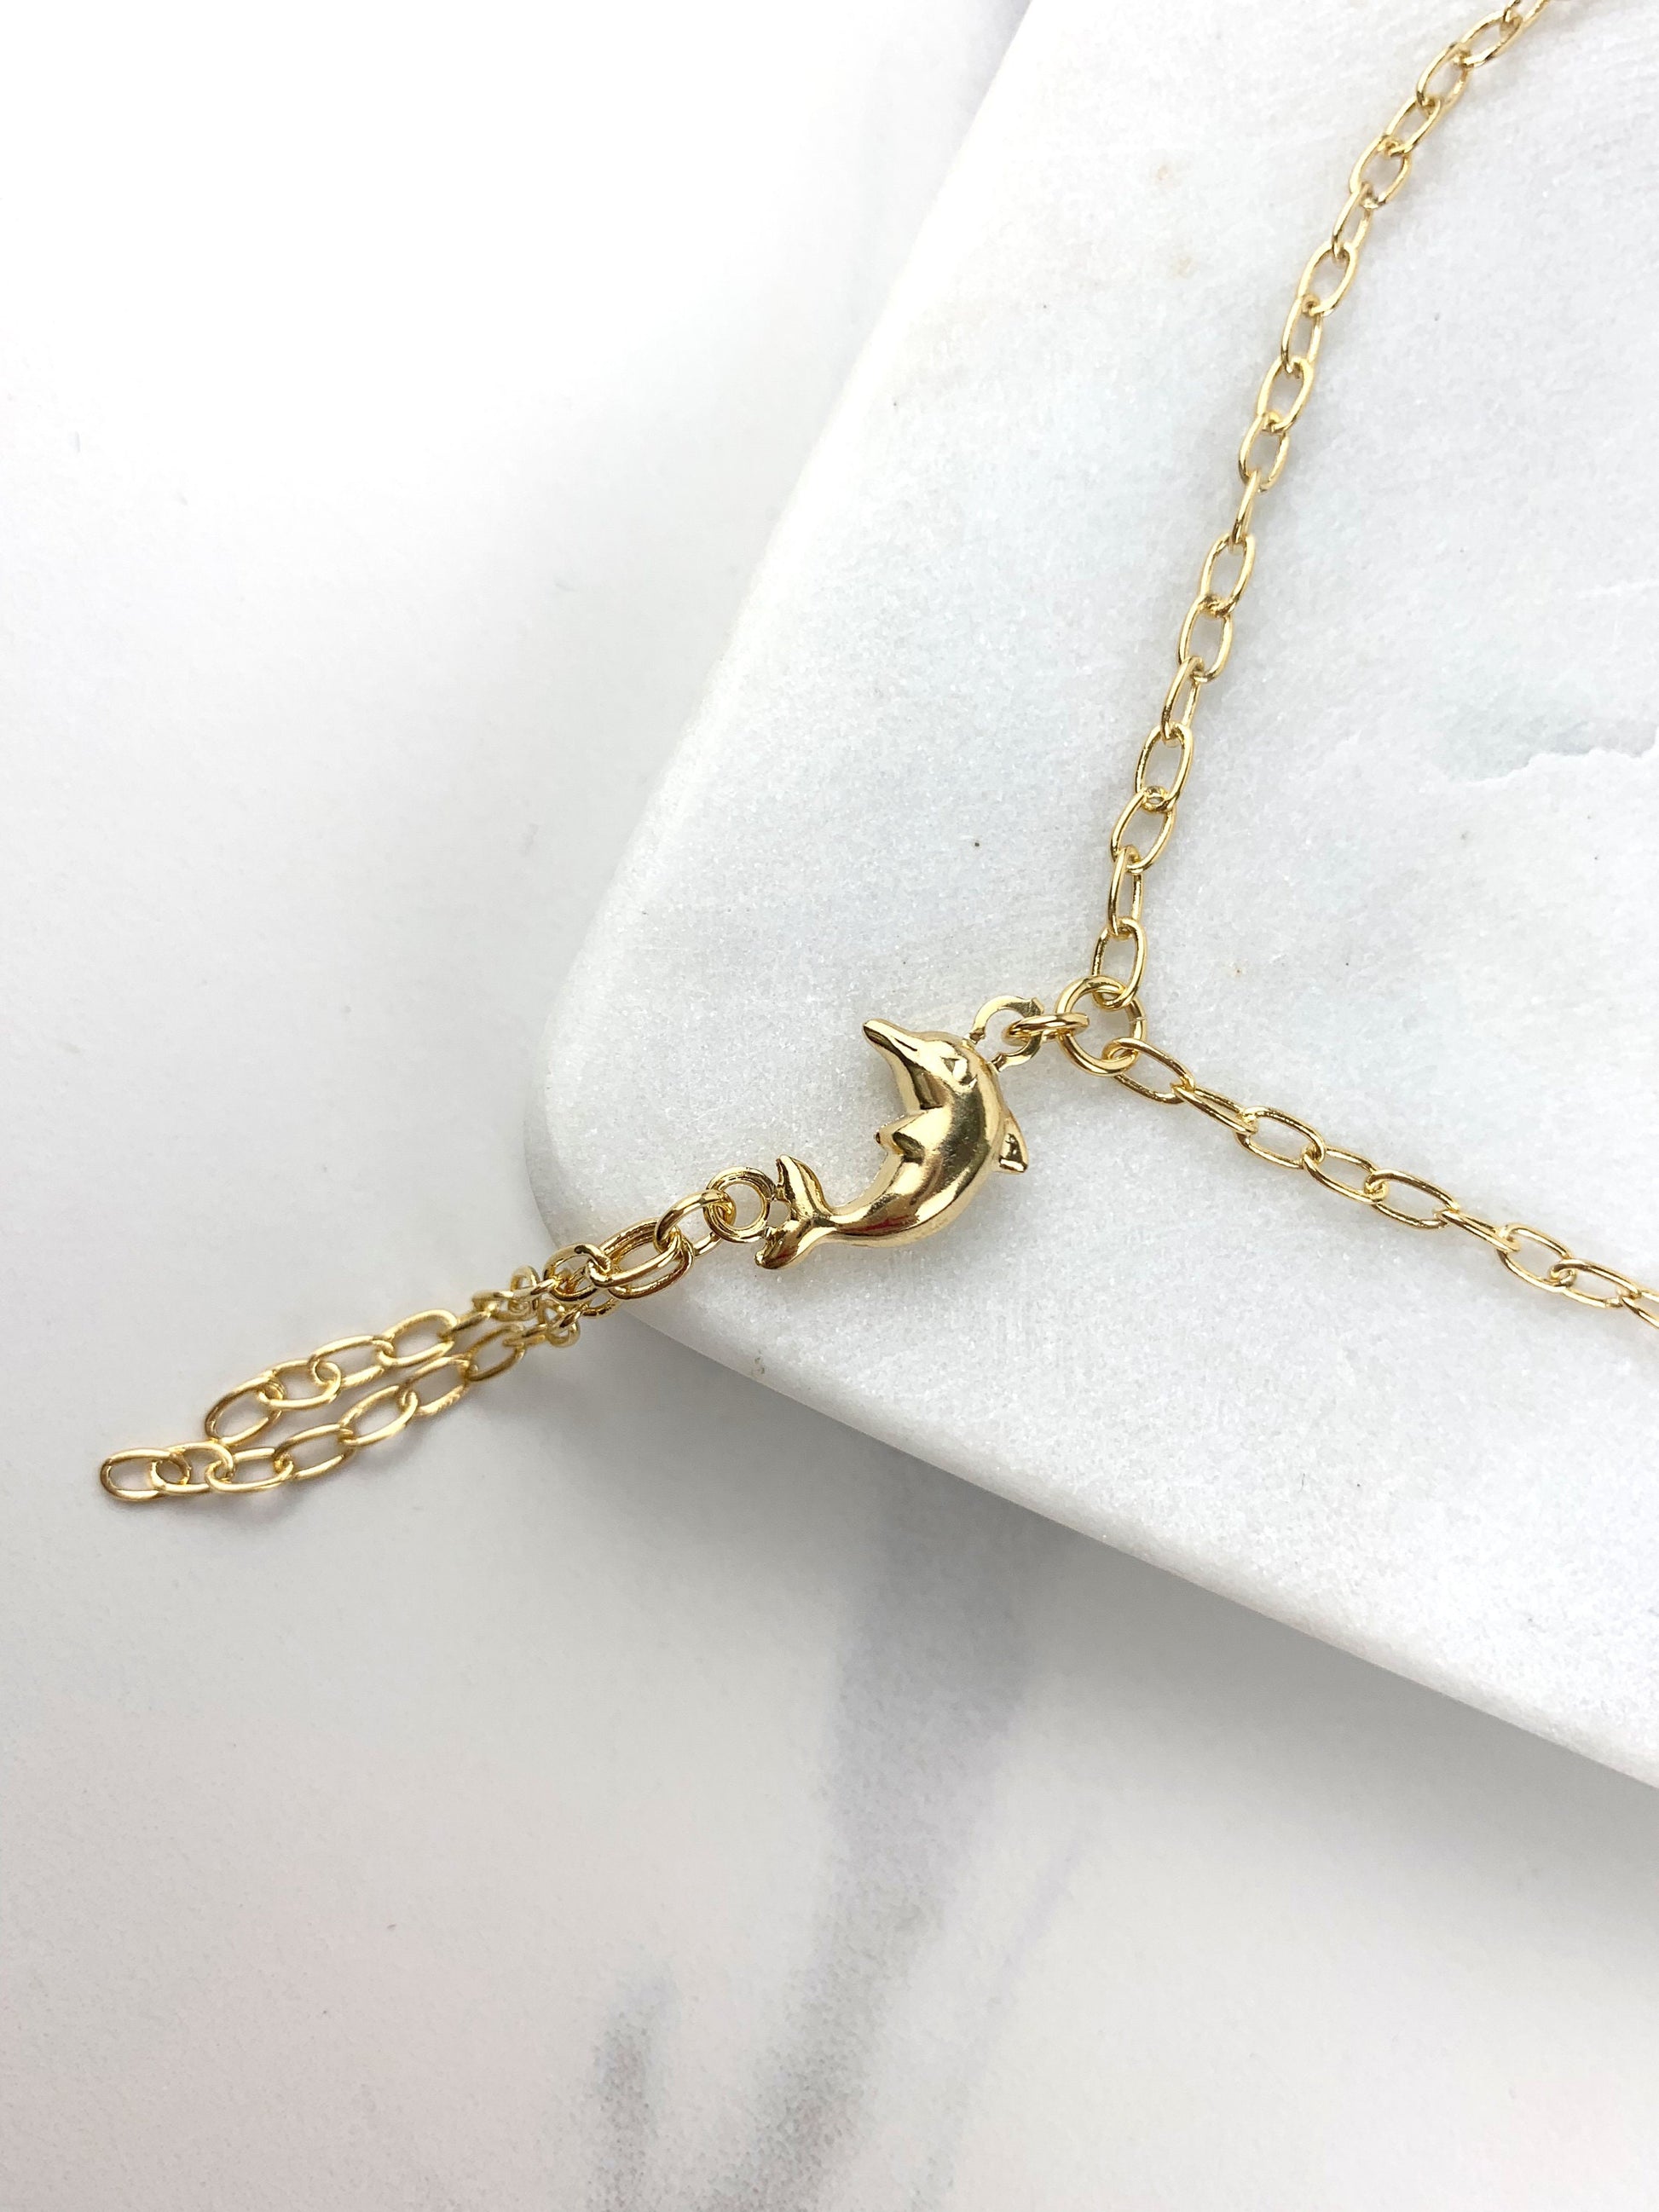 18k Gold Filled 2mm Paperclip Chain Dolphin Bracelet Wholesale Jewelry Supplies